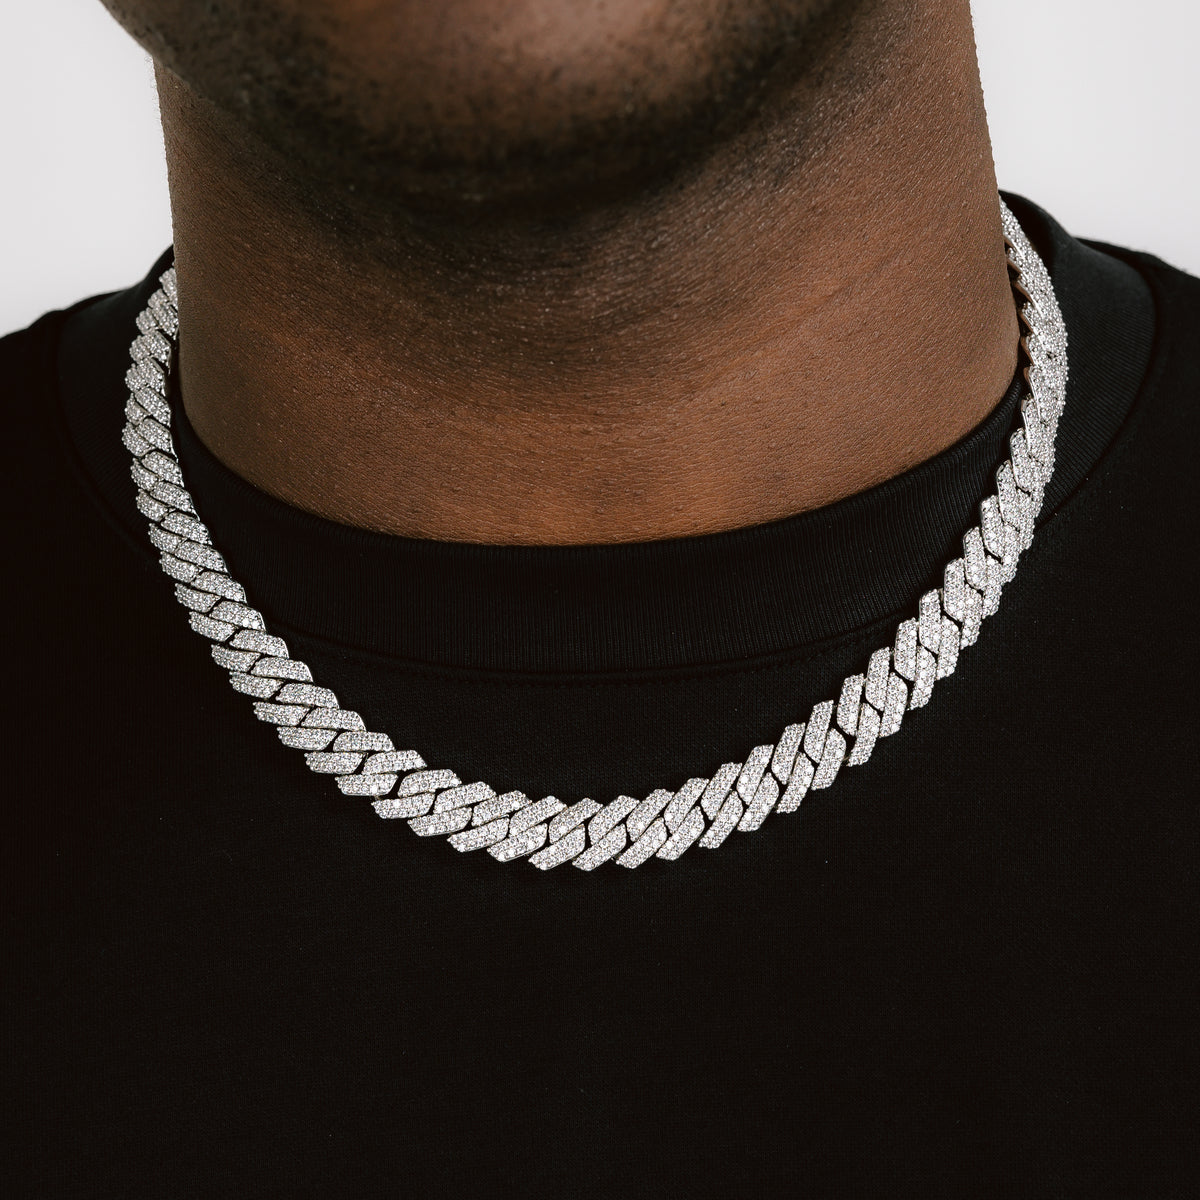 Number 23 Cuban Chain for Men Iced Out Choker Necklace Real Gold